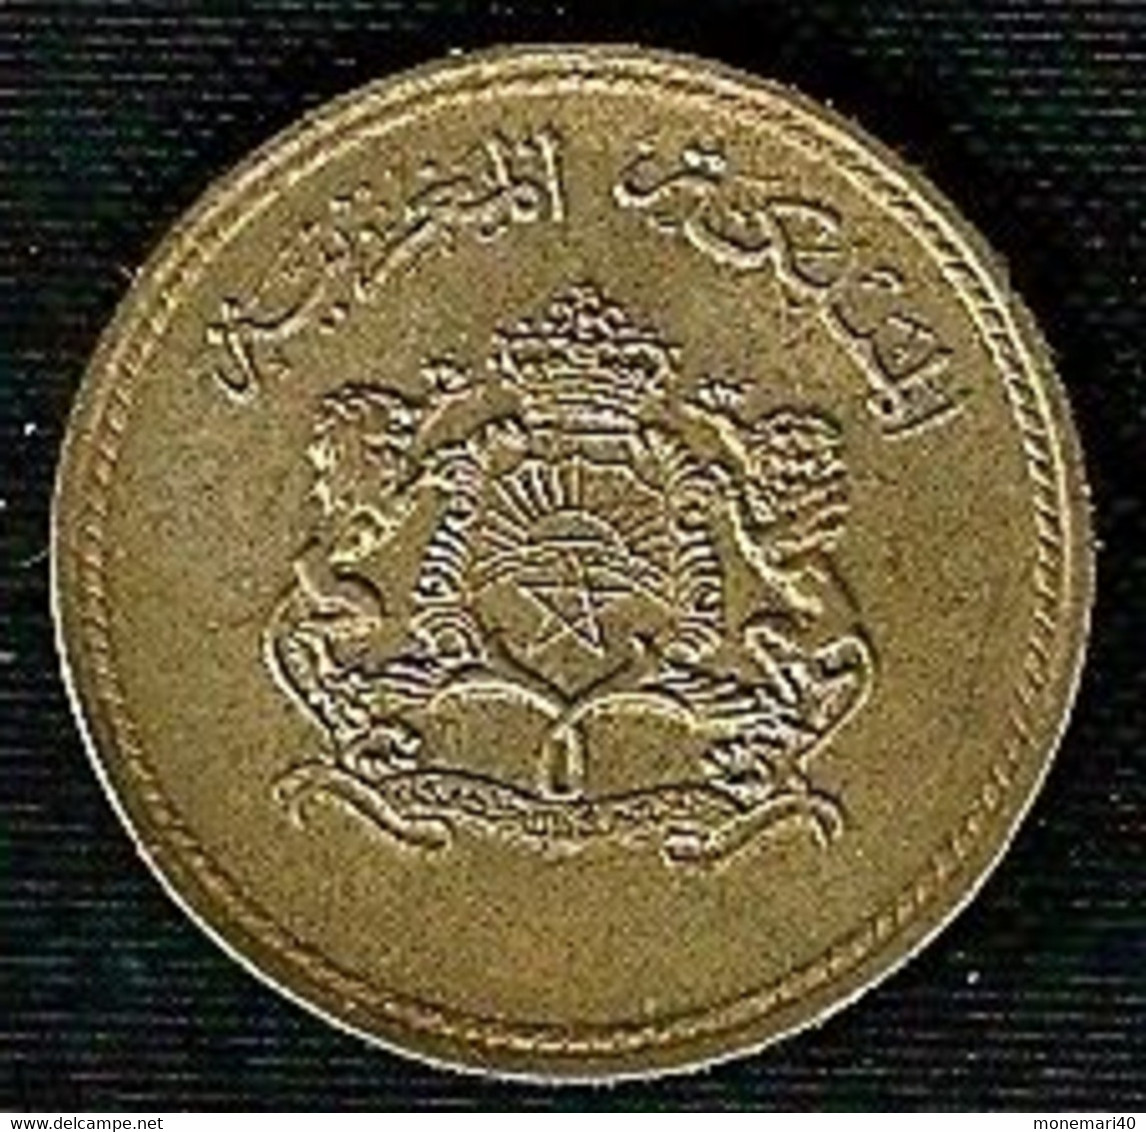 PAYS-BAS 5 CENT - 1983 - Trade Coins